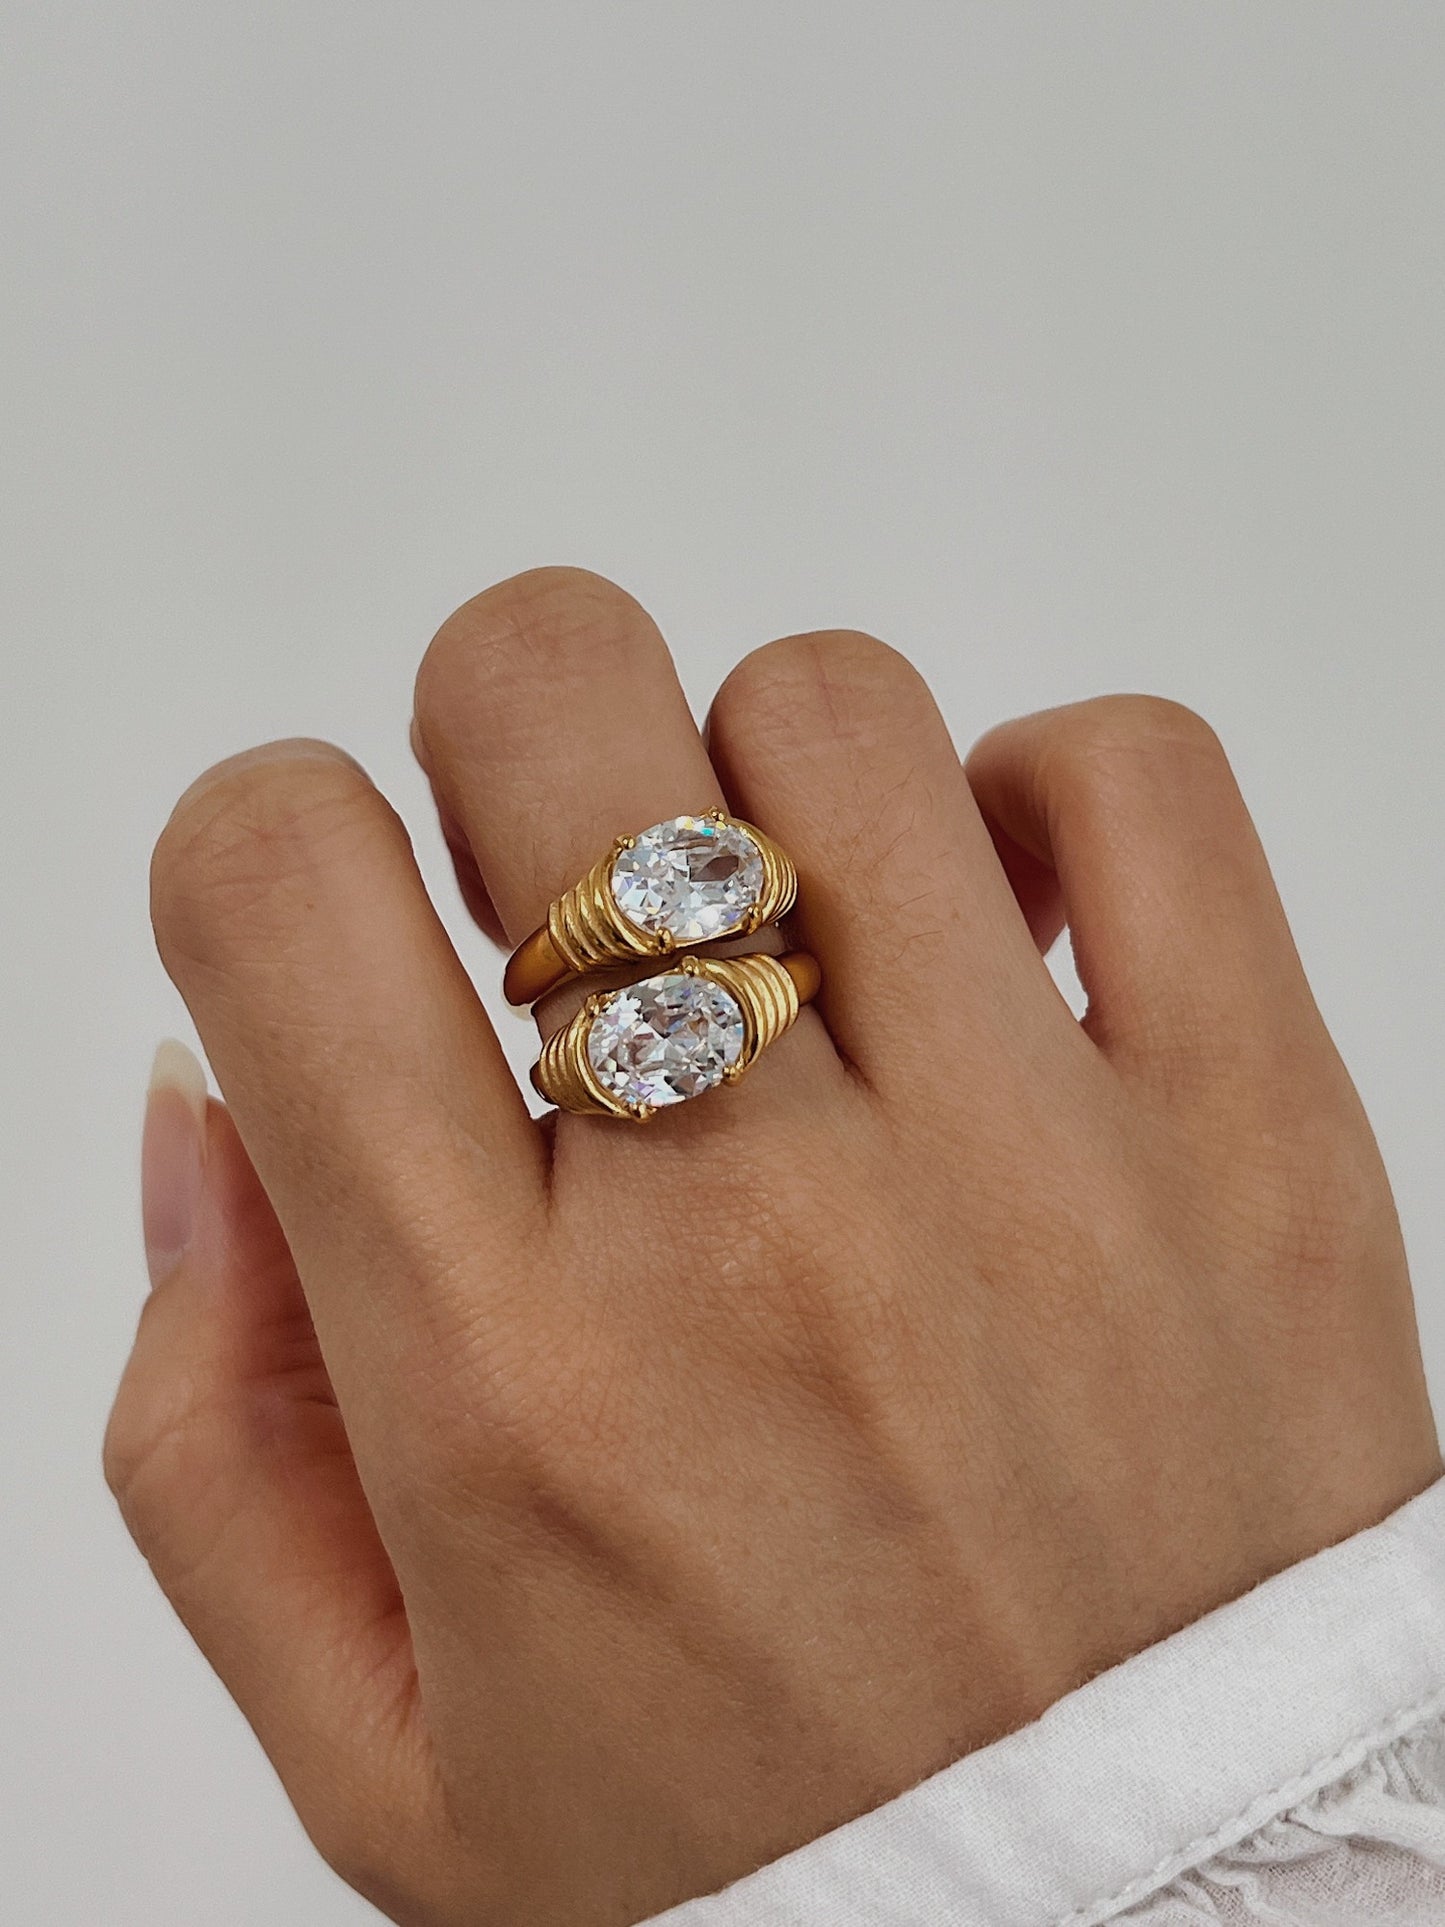 chunky cz ring, Clear Gemstone Ring, Oval Cut CZ Ring, Gold CZ Ring, 18K Gold Oval Ring, Cubic Zirconia Ring, Statement Ring, Stacking Ring, cz dome ring